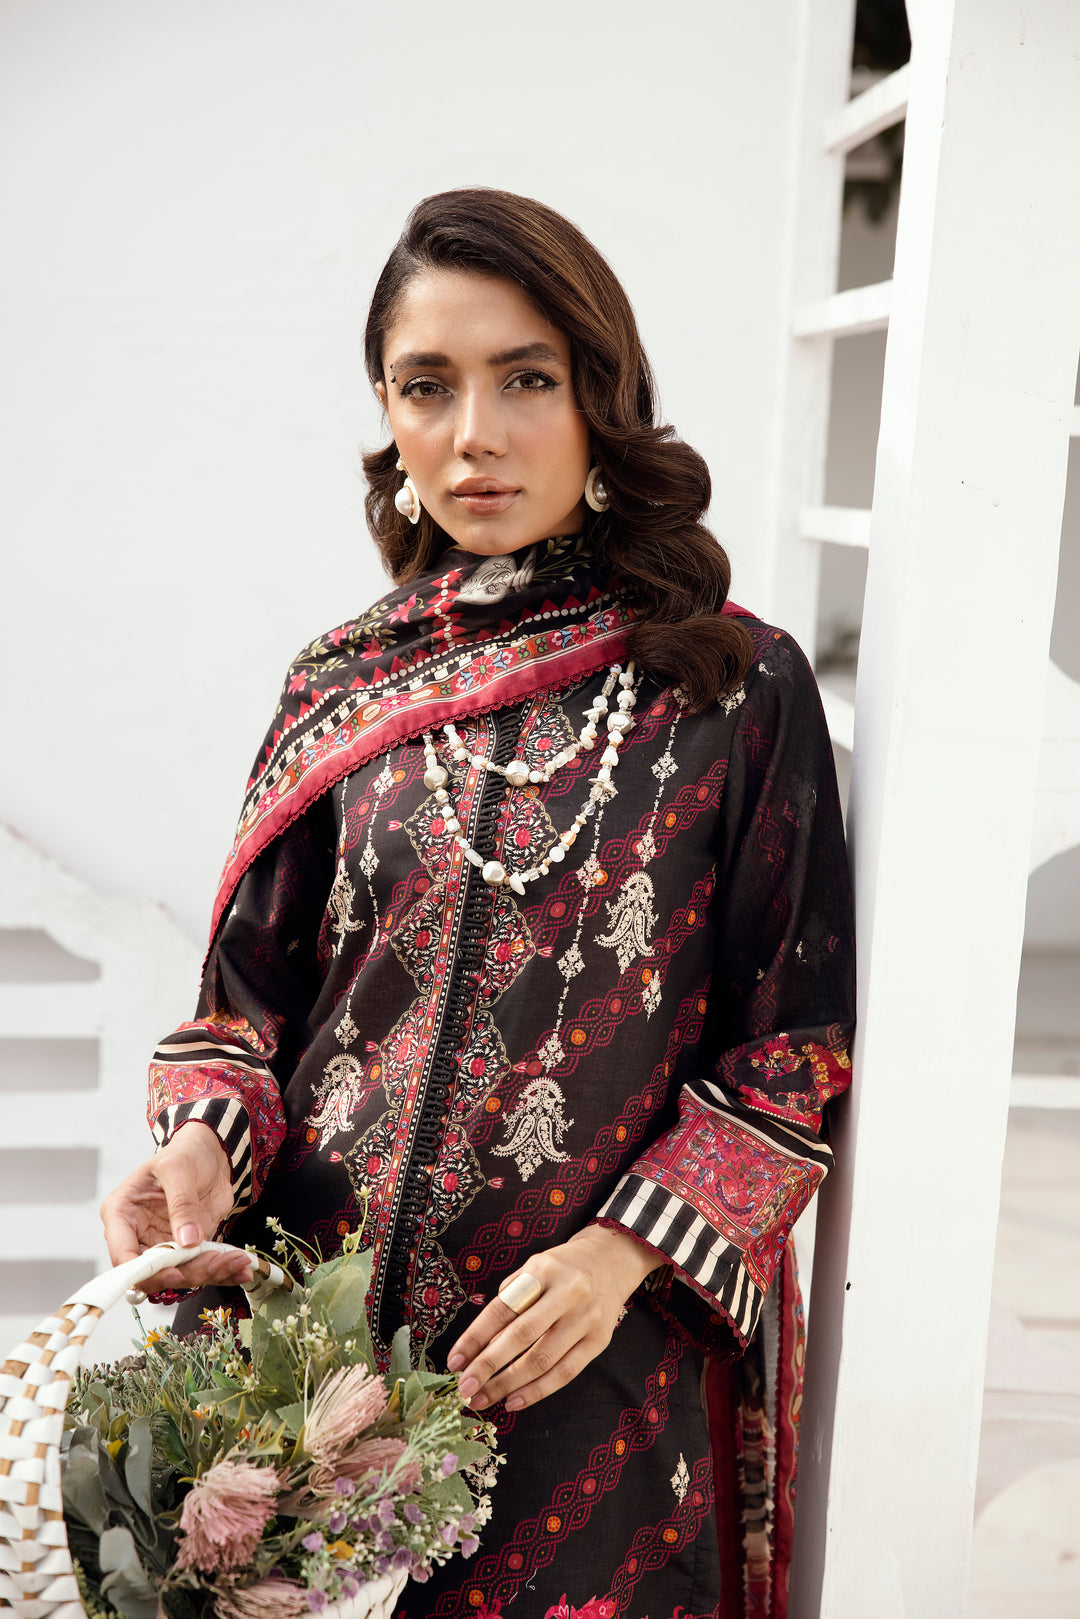 3PCS UNSTITCHED-DIGITAL PRINTED LAWN SUIT SUMMER 24 BY JACQUARD CLOTHING